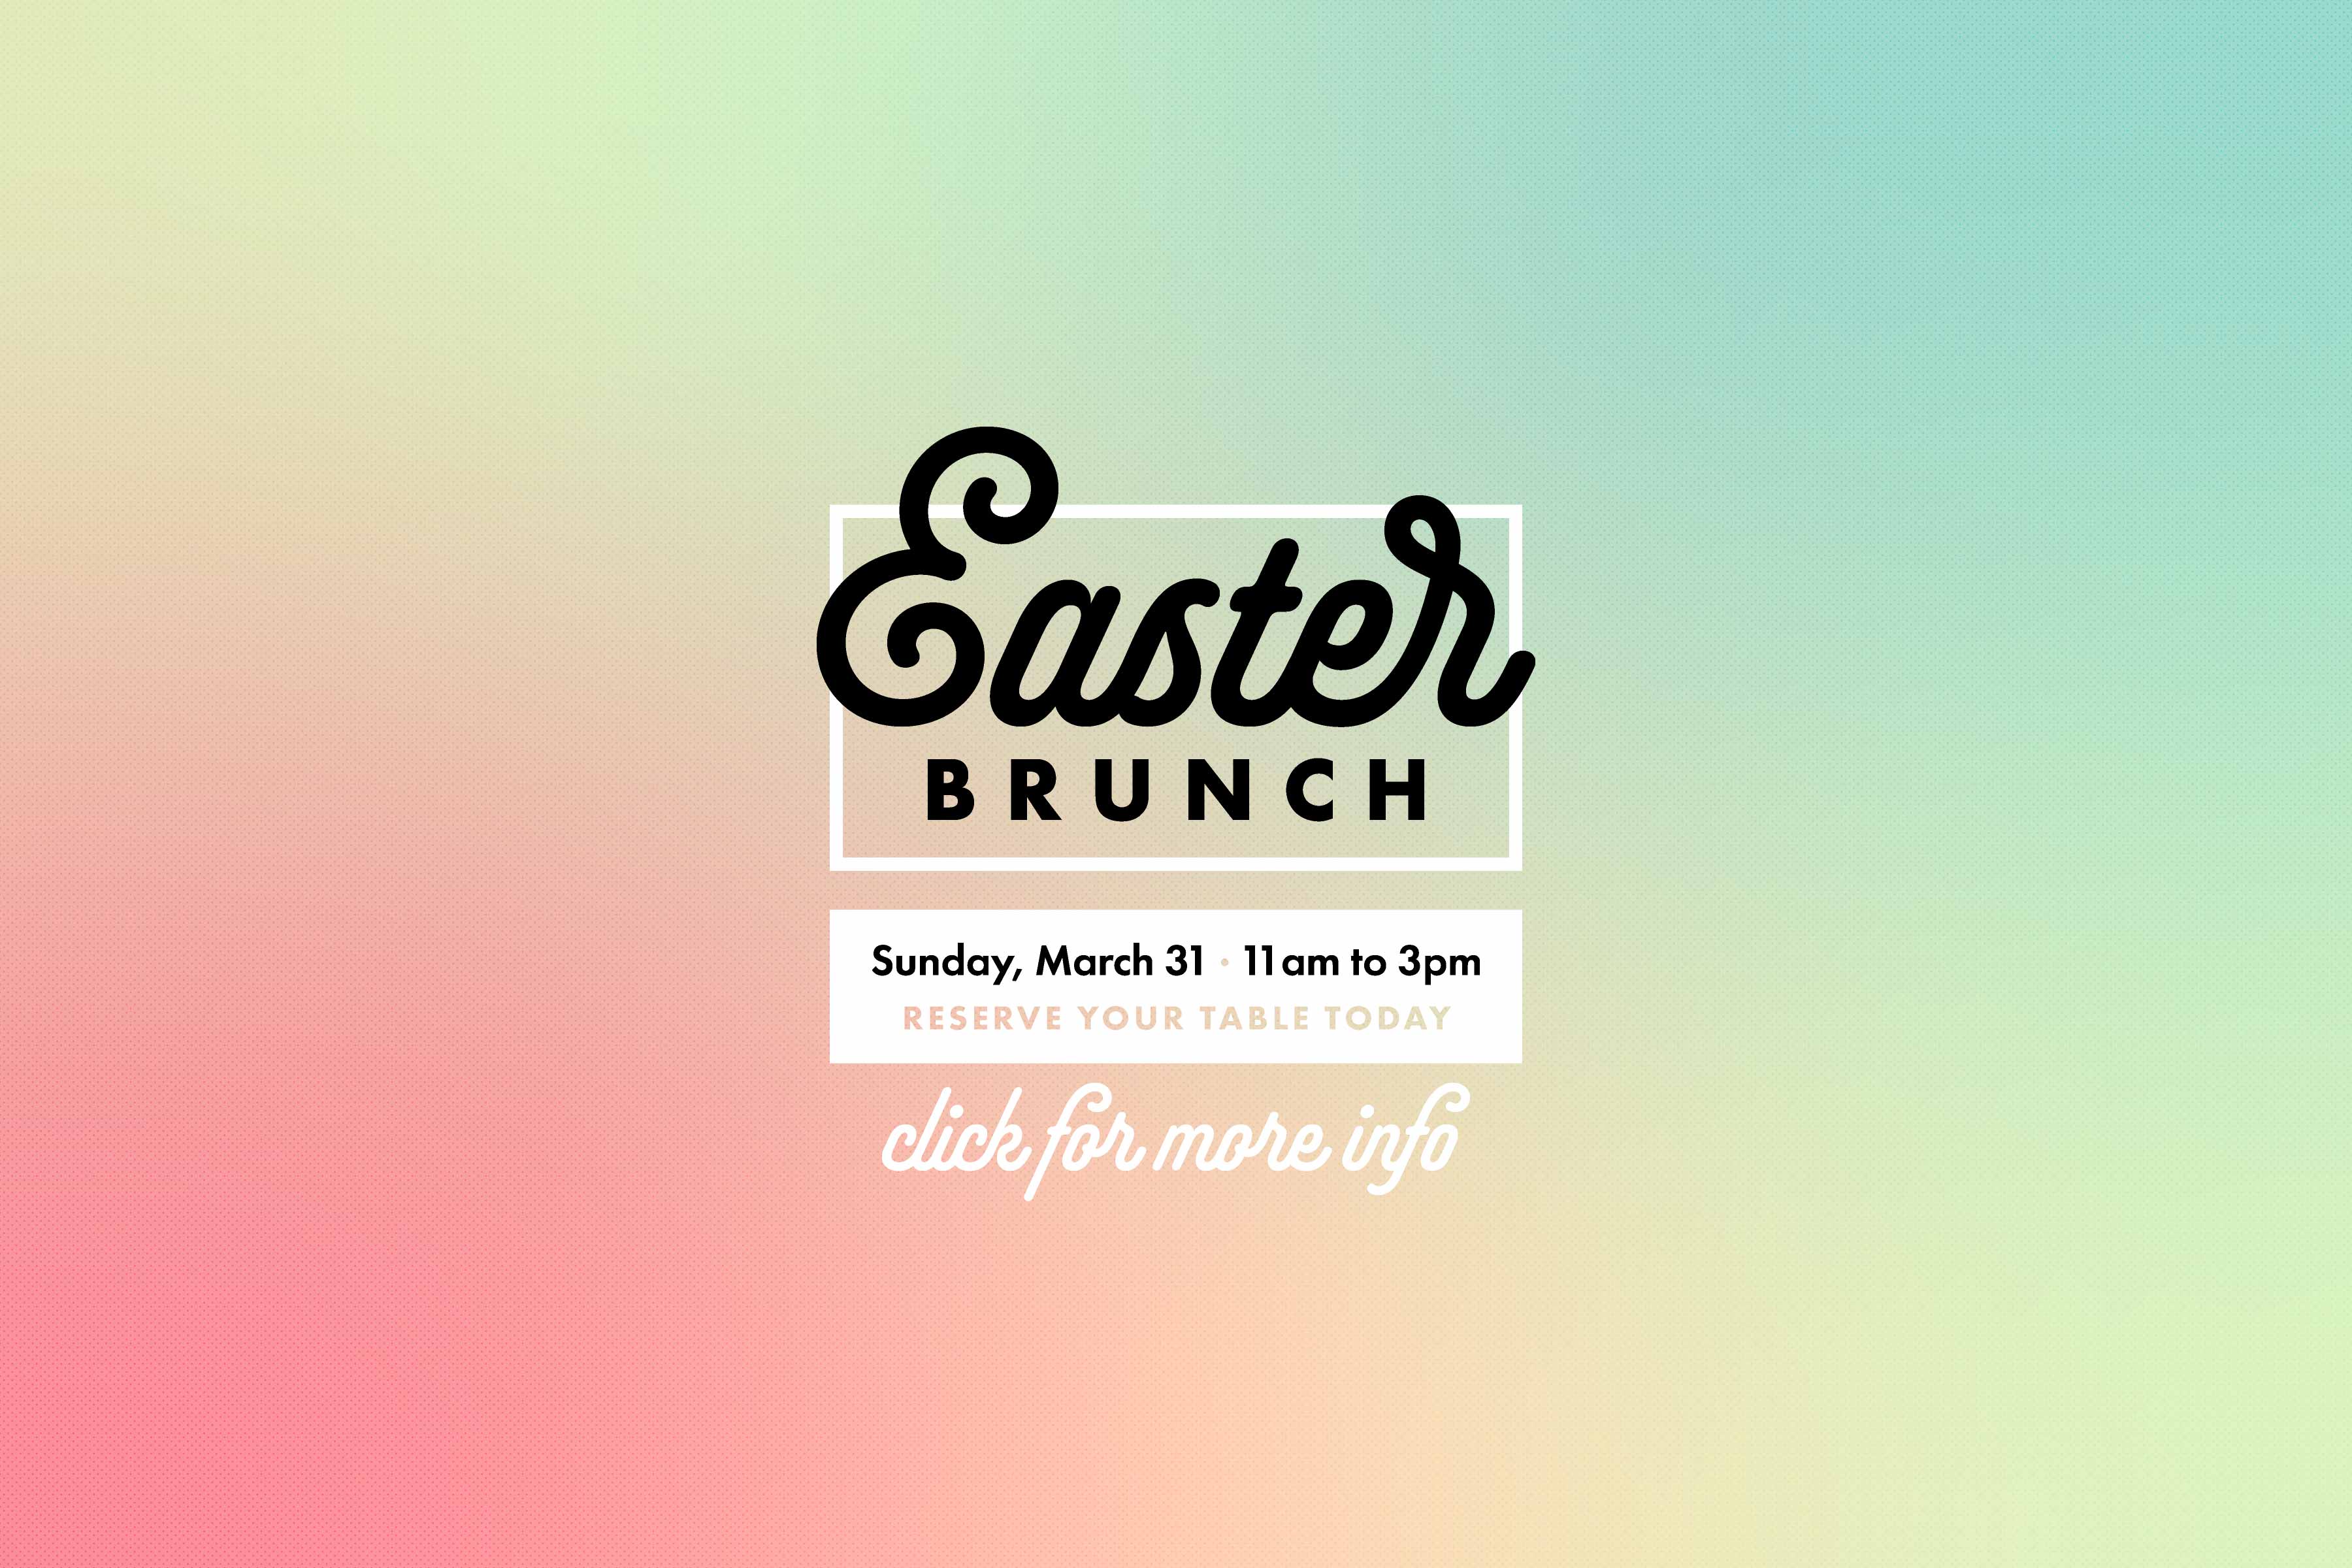 Hubbard Easter Brunch available March 31 from 11am to 3pm.